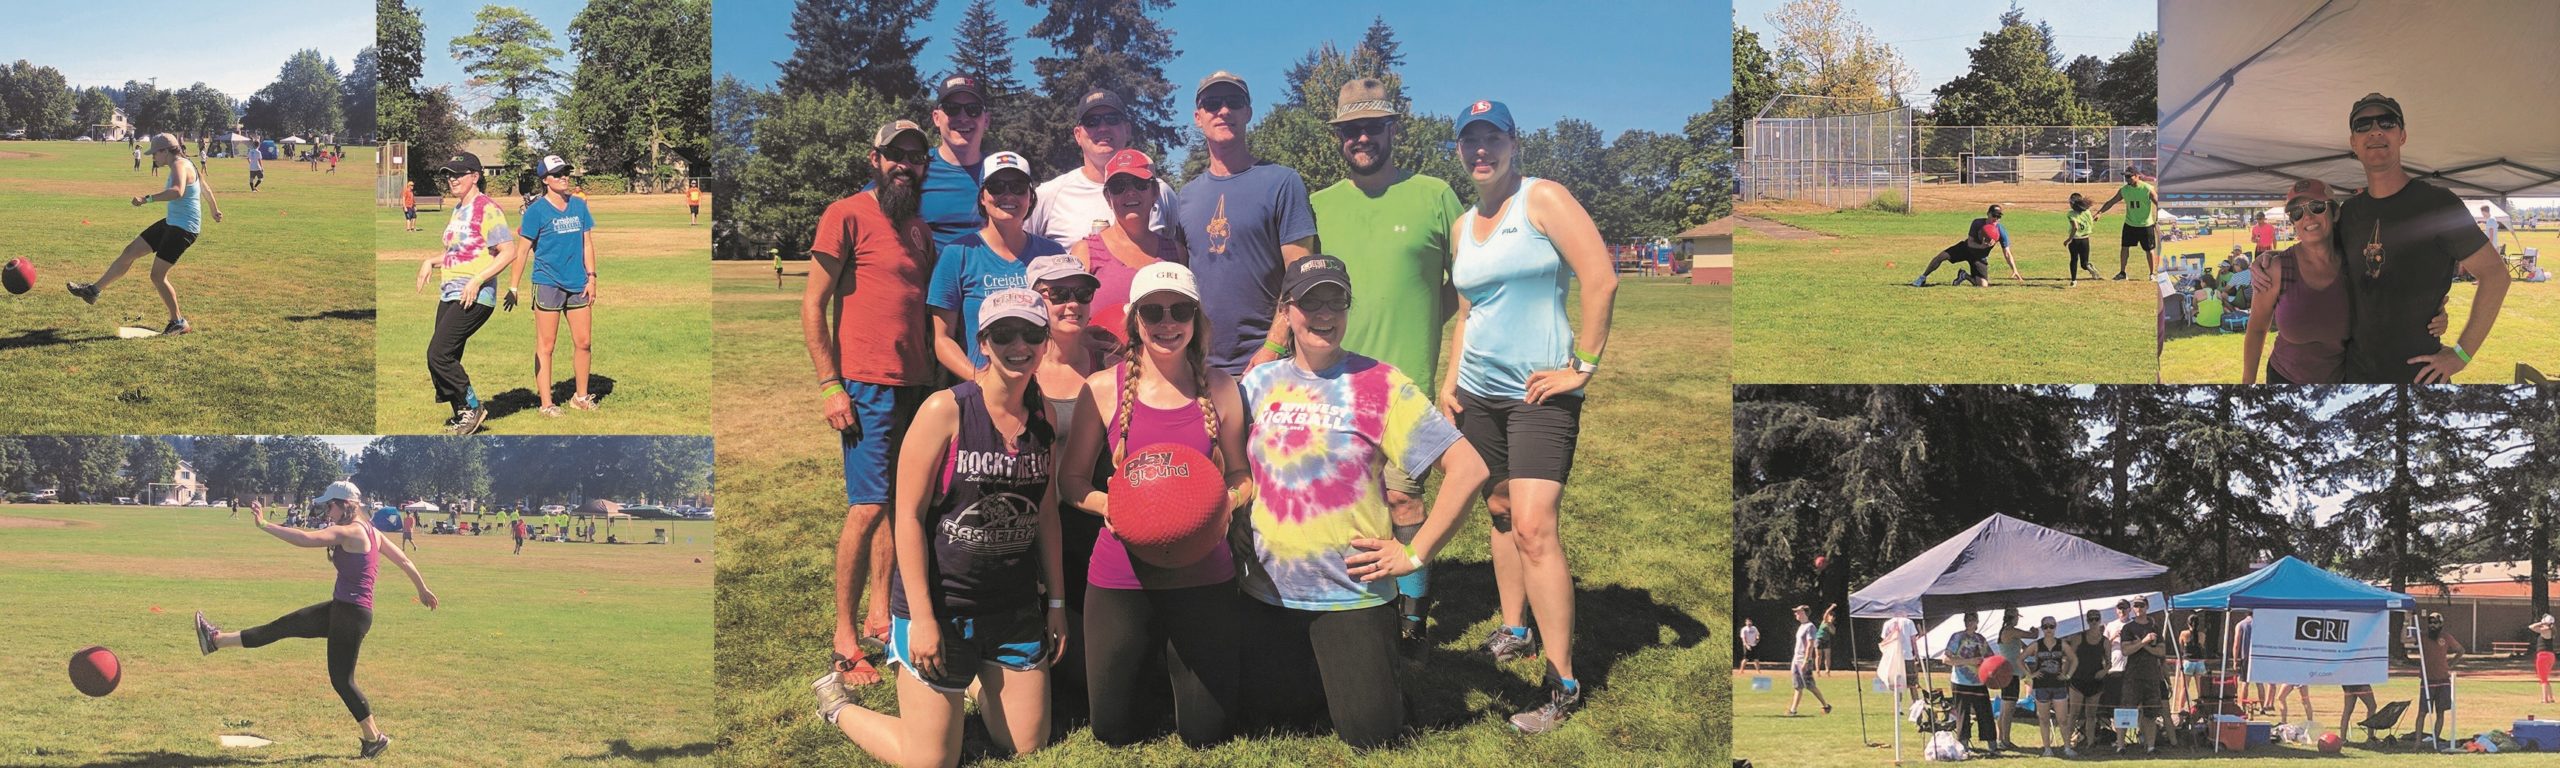 8th Annual Kickball Without Borders Fundraiser